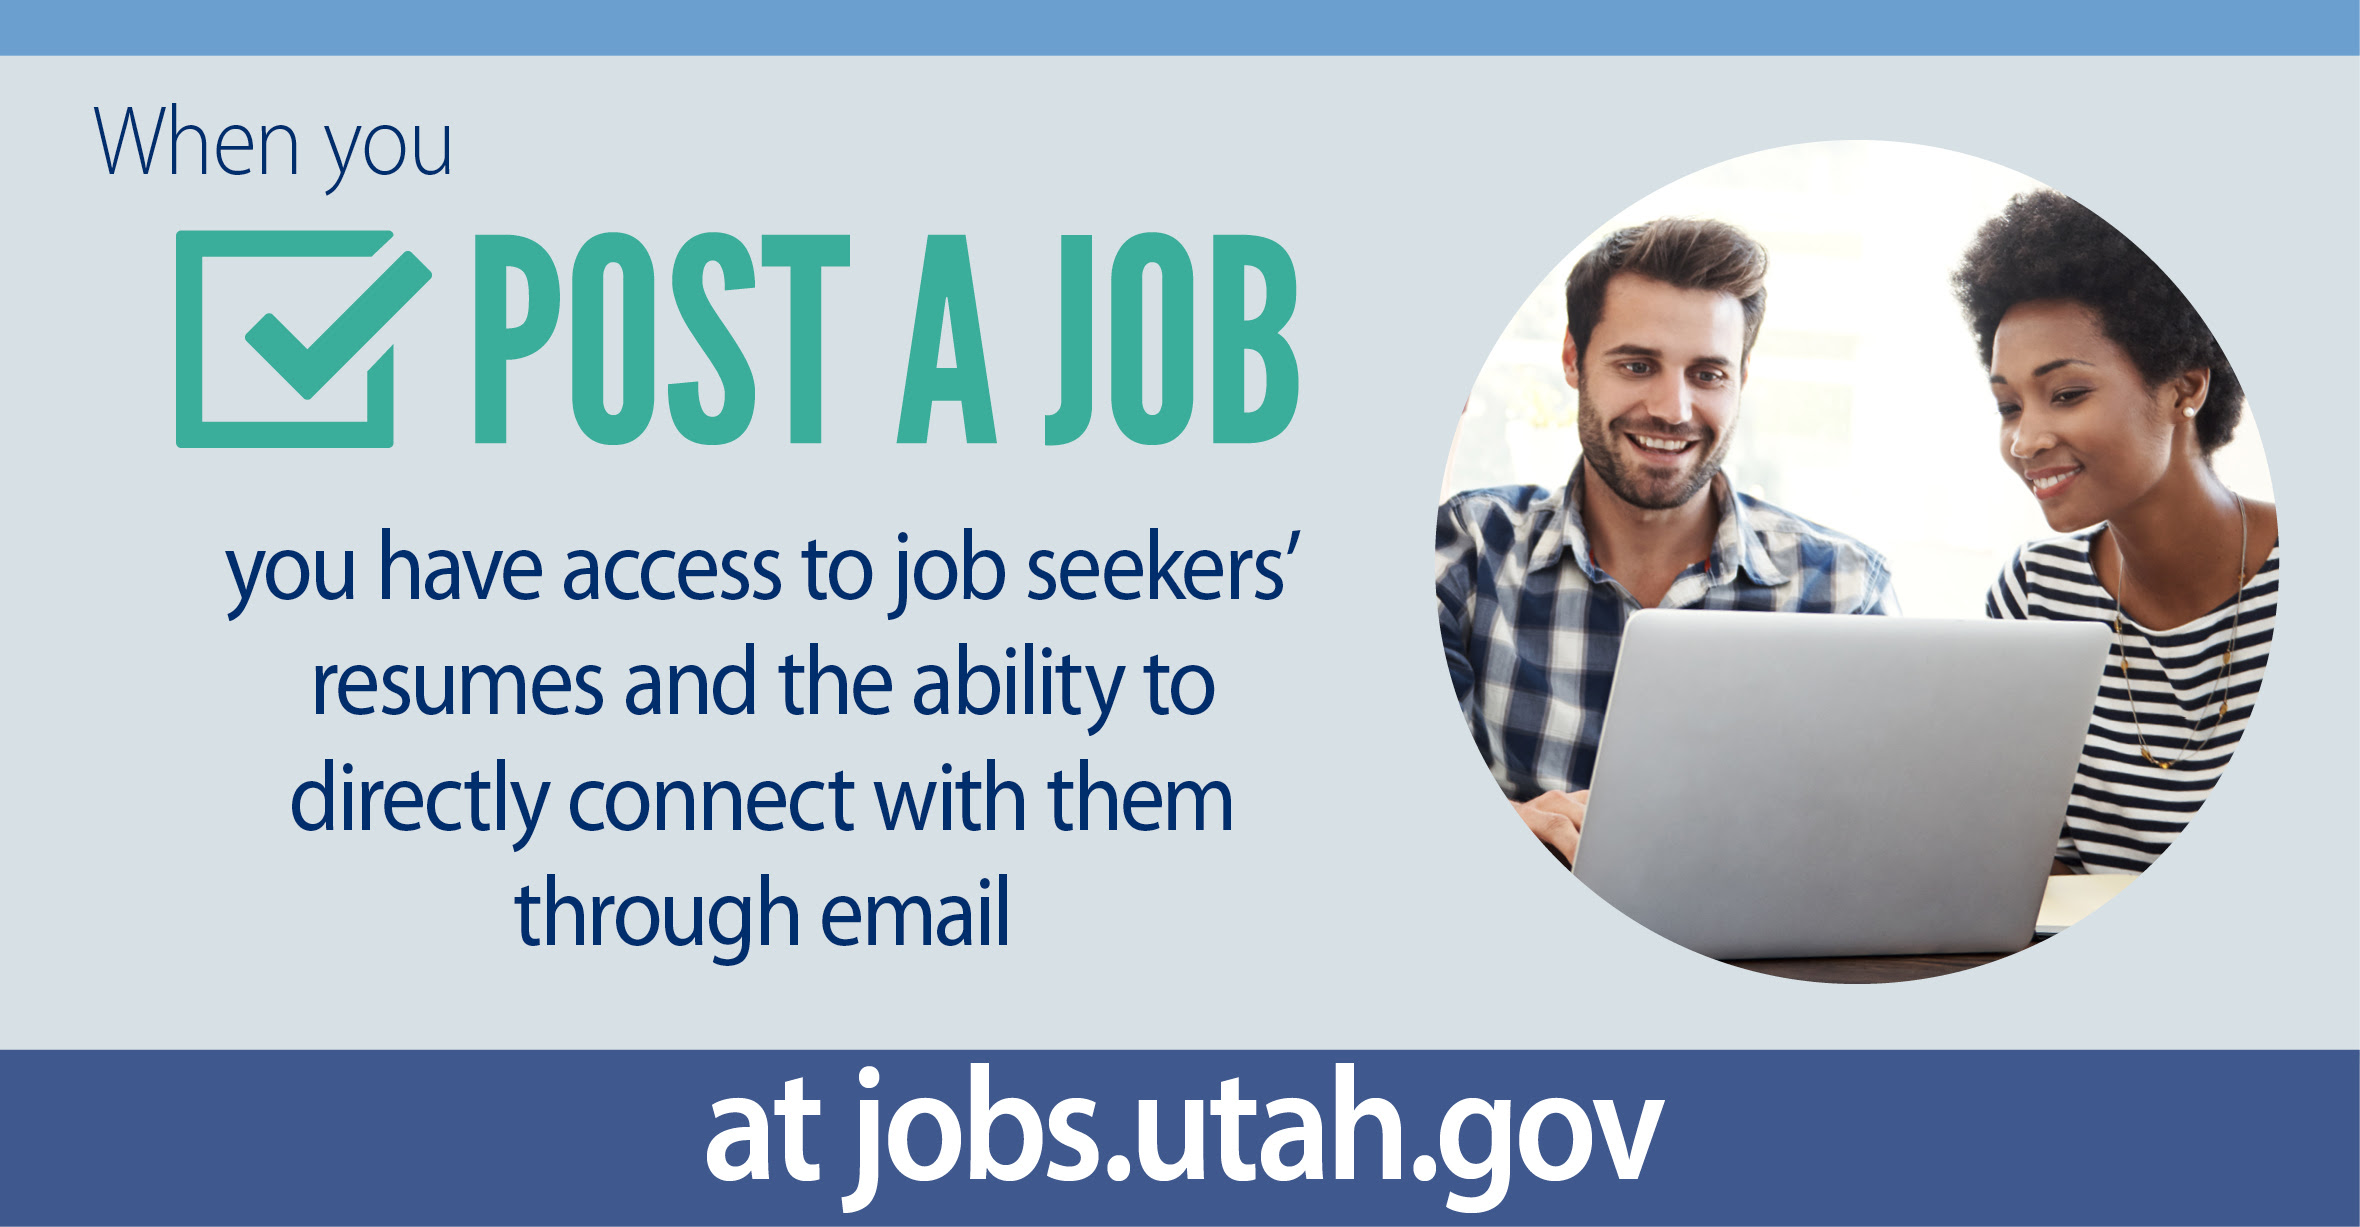 When you post a job you have access to job seeker's resumes and the ability to directly connect with them through email at jobs.utah.gov